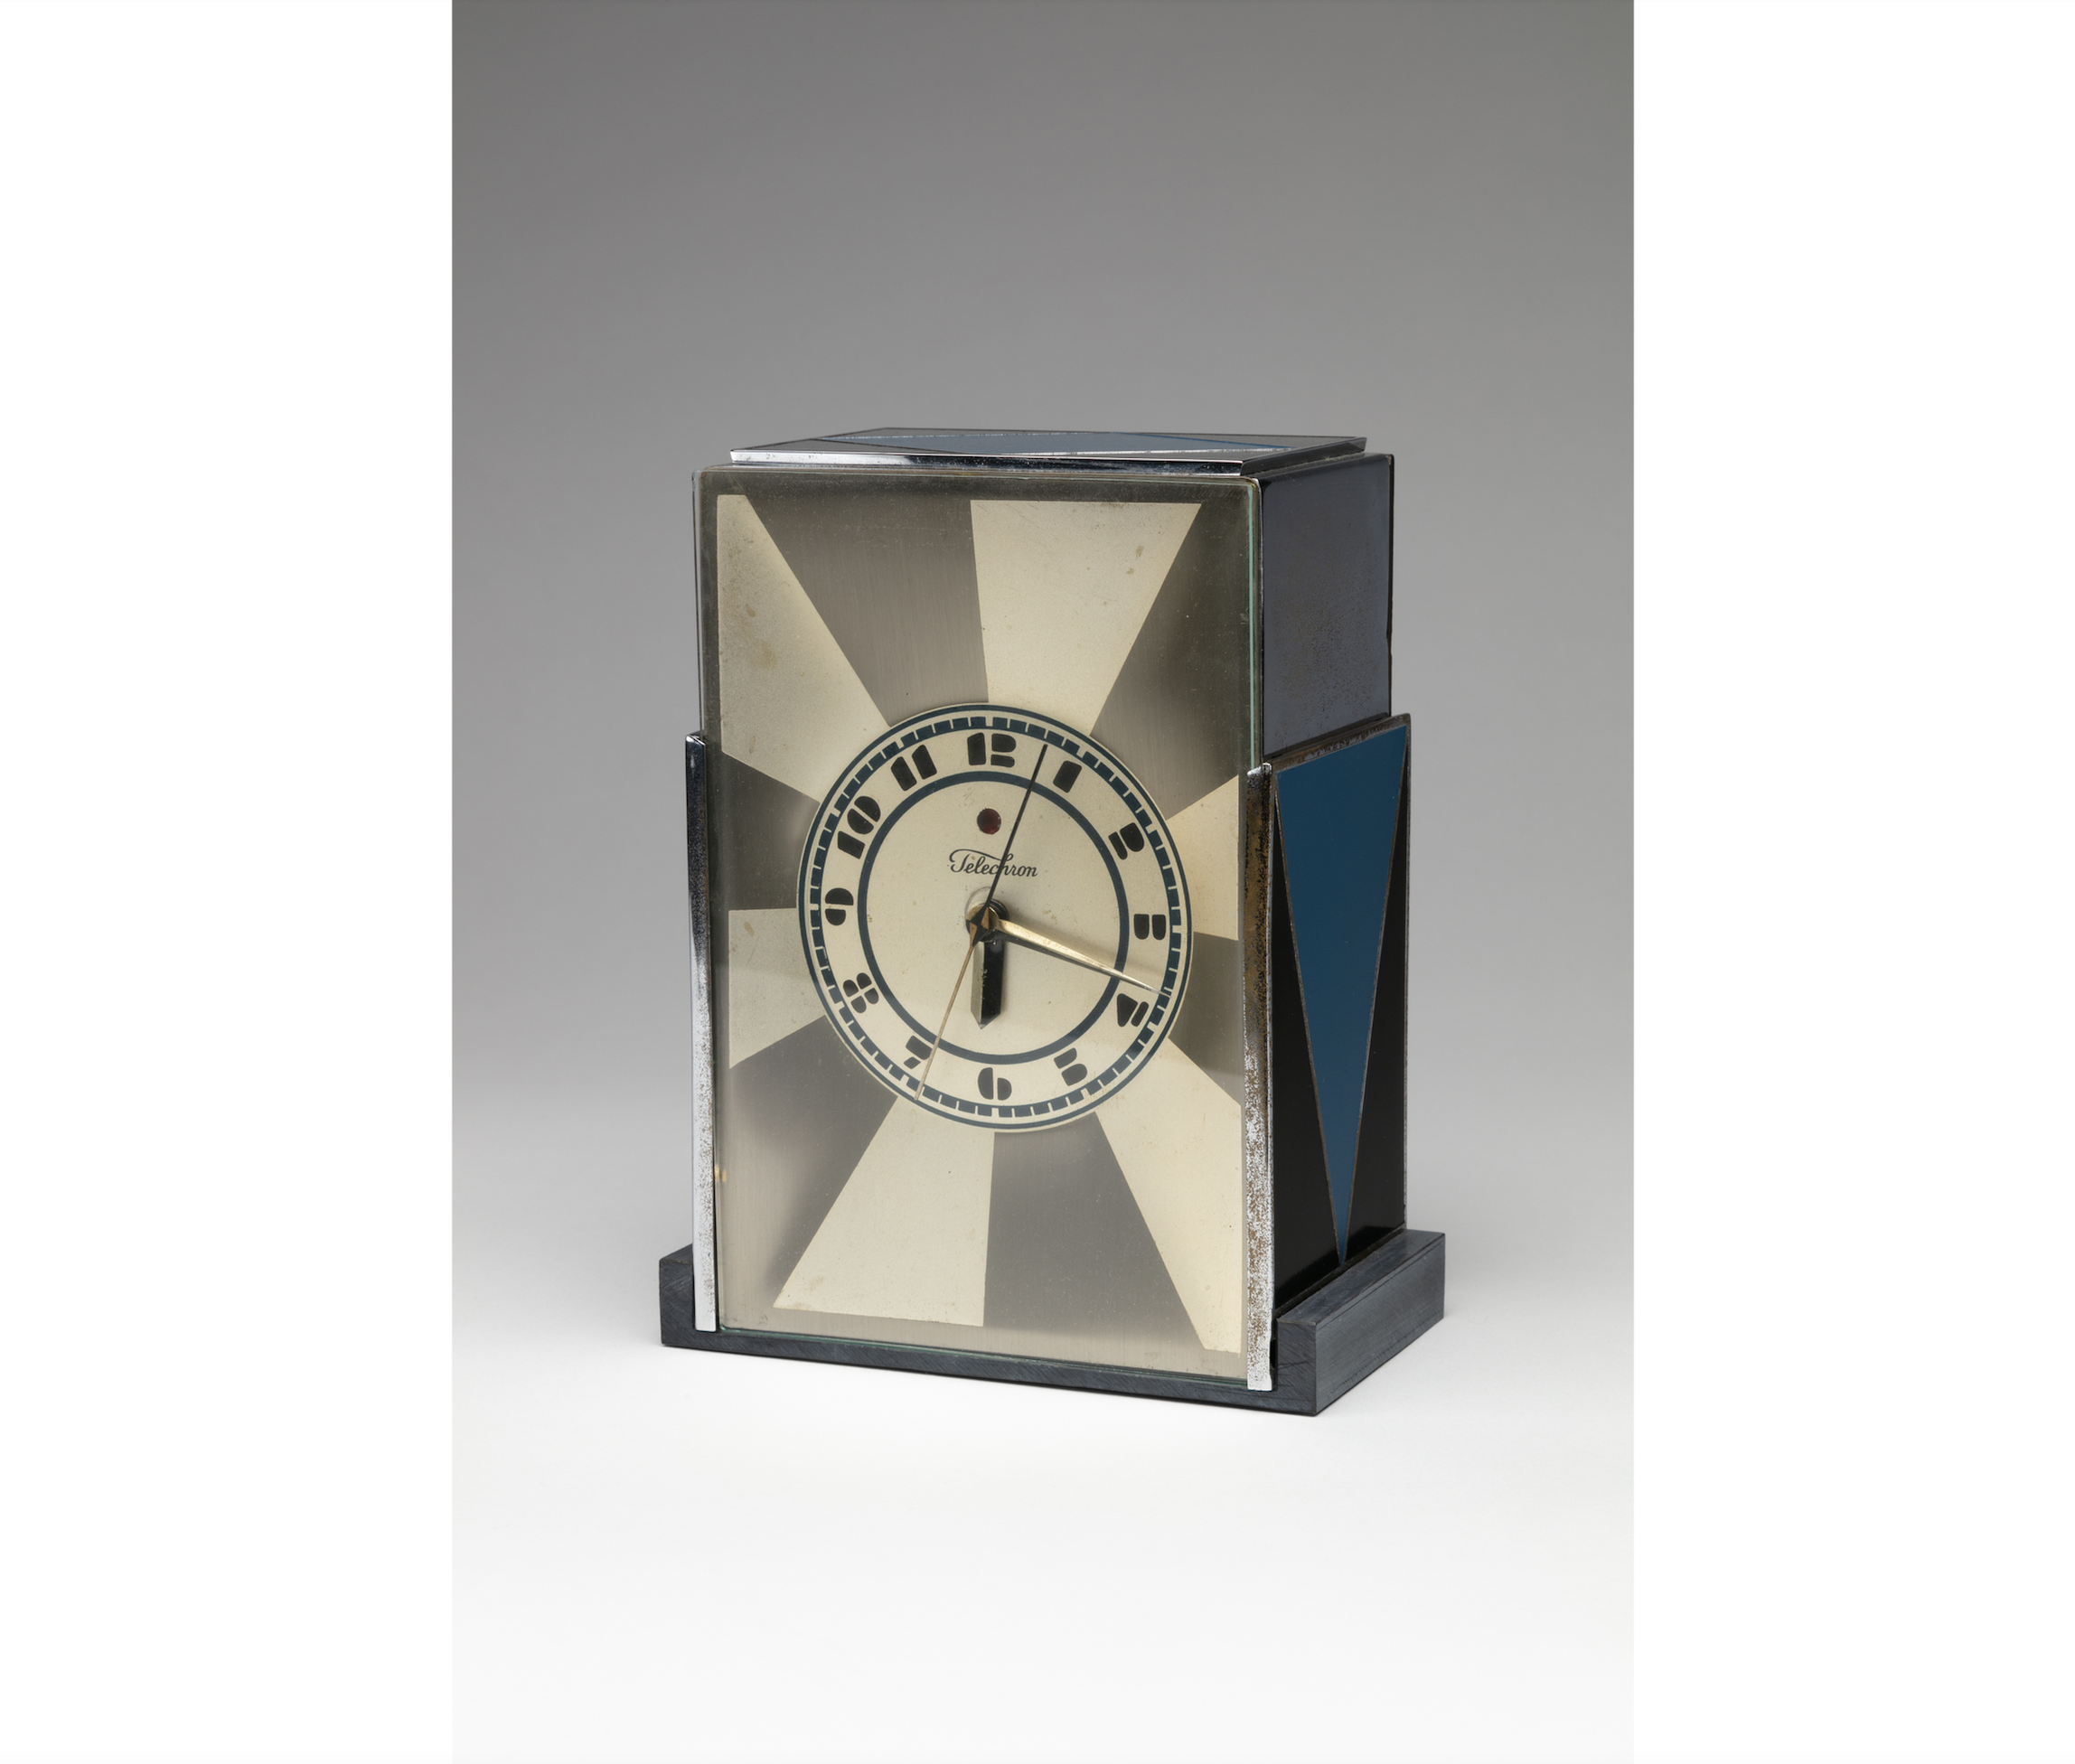 Modernique clock, 1928, chromiun-plated and enameled metal, molded Bakelite and brush-burnished silver. Paul T. Frankl, designer, American, born Austria, 1887-1958. Warren Telechron Company, manufacturer, Ashland, Massachusetts, 1926-1992. 7 3/4 by 6 by 3 1/2in. Collection Kirkland Museum of Fine & Decorative Art, Denver, gift of Michael Merson, 2010.0670. Courtesy of Kirkland Museum of Fine & Decorative Art, Denver. Photo by Wes Magyar